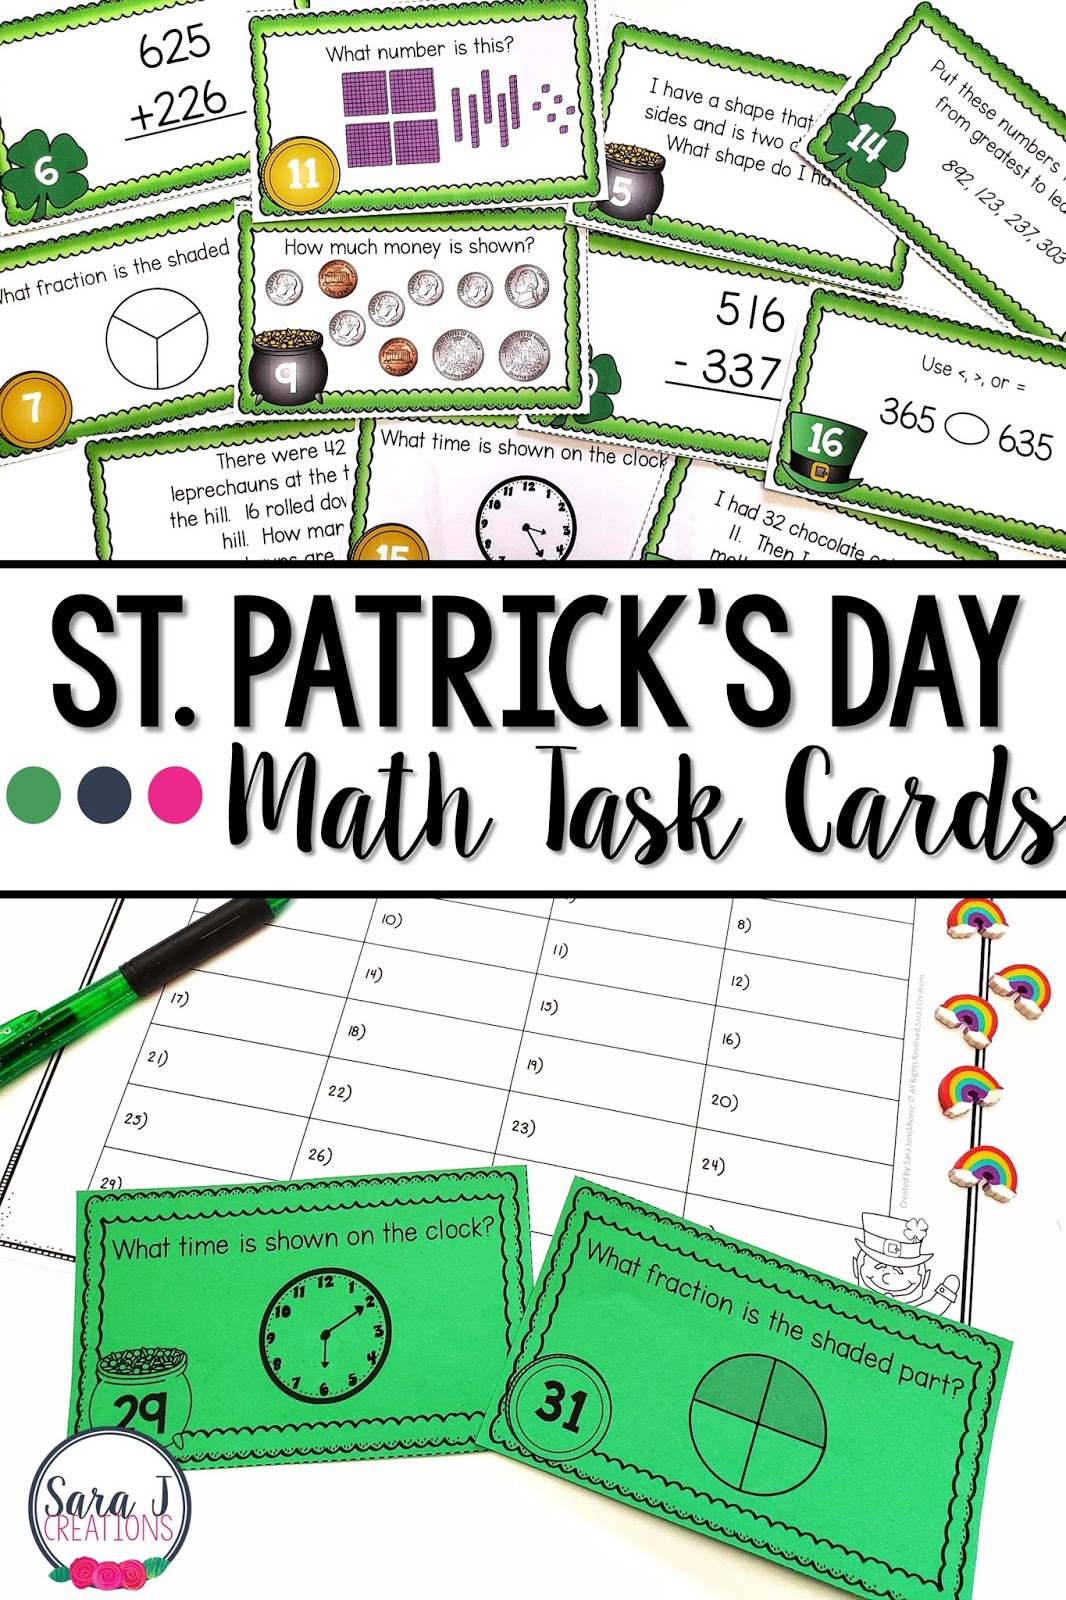 St. Patrick's Day Math Task Cards are the perfect way to practice place value, story problems, addition and subtraction, time, money and so many other important math skills. These 32 task cards make a no prep math center and serve as a review for the whole class or extra practice for fast finishers. Ideal for math practice for second grade but could also be used with first or third graders or in special education.